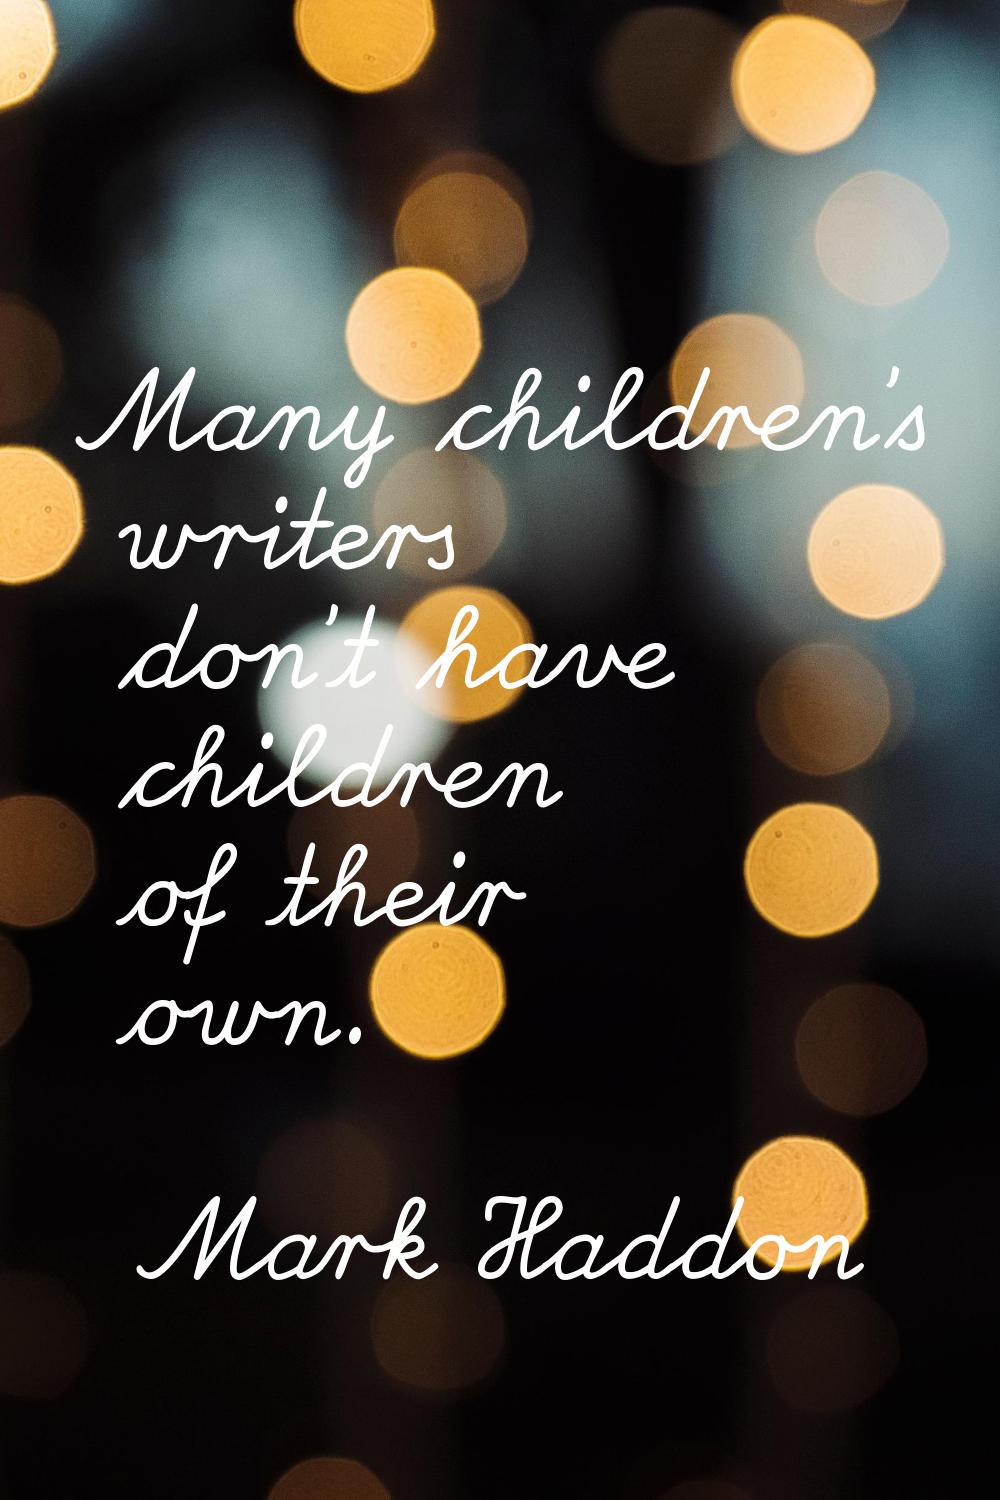 Many children's writers don't have children of their own.